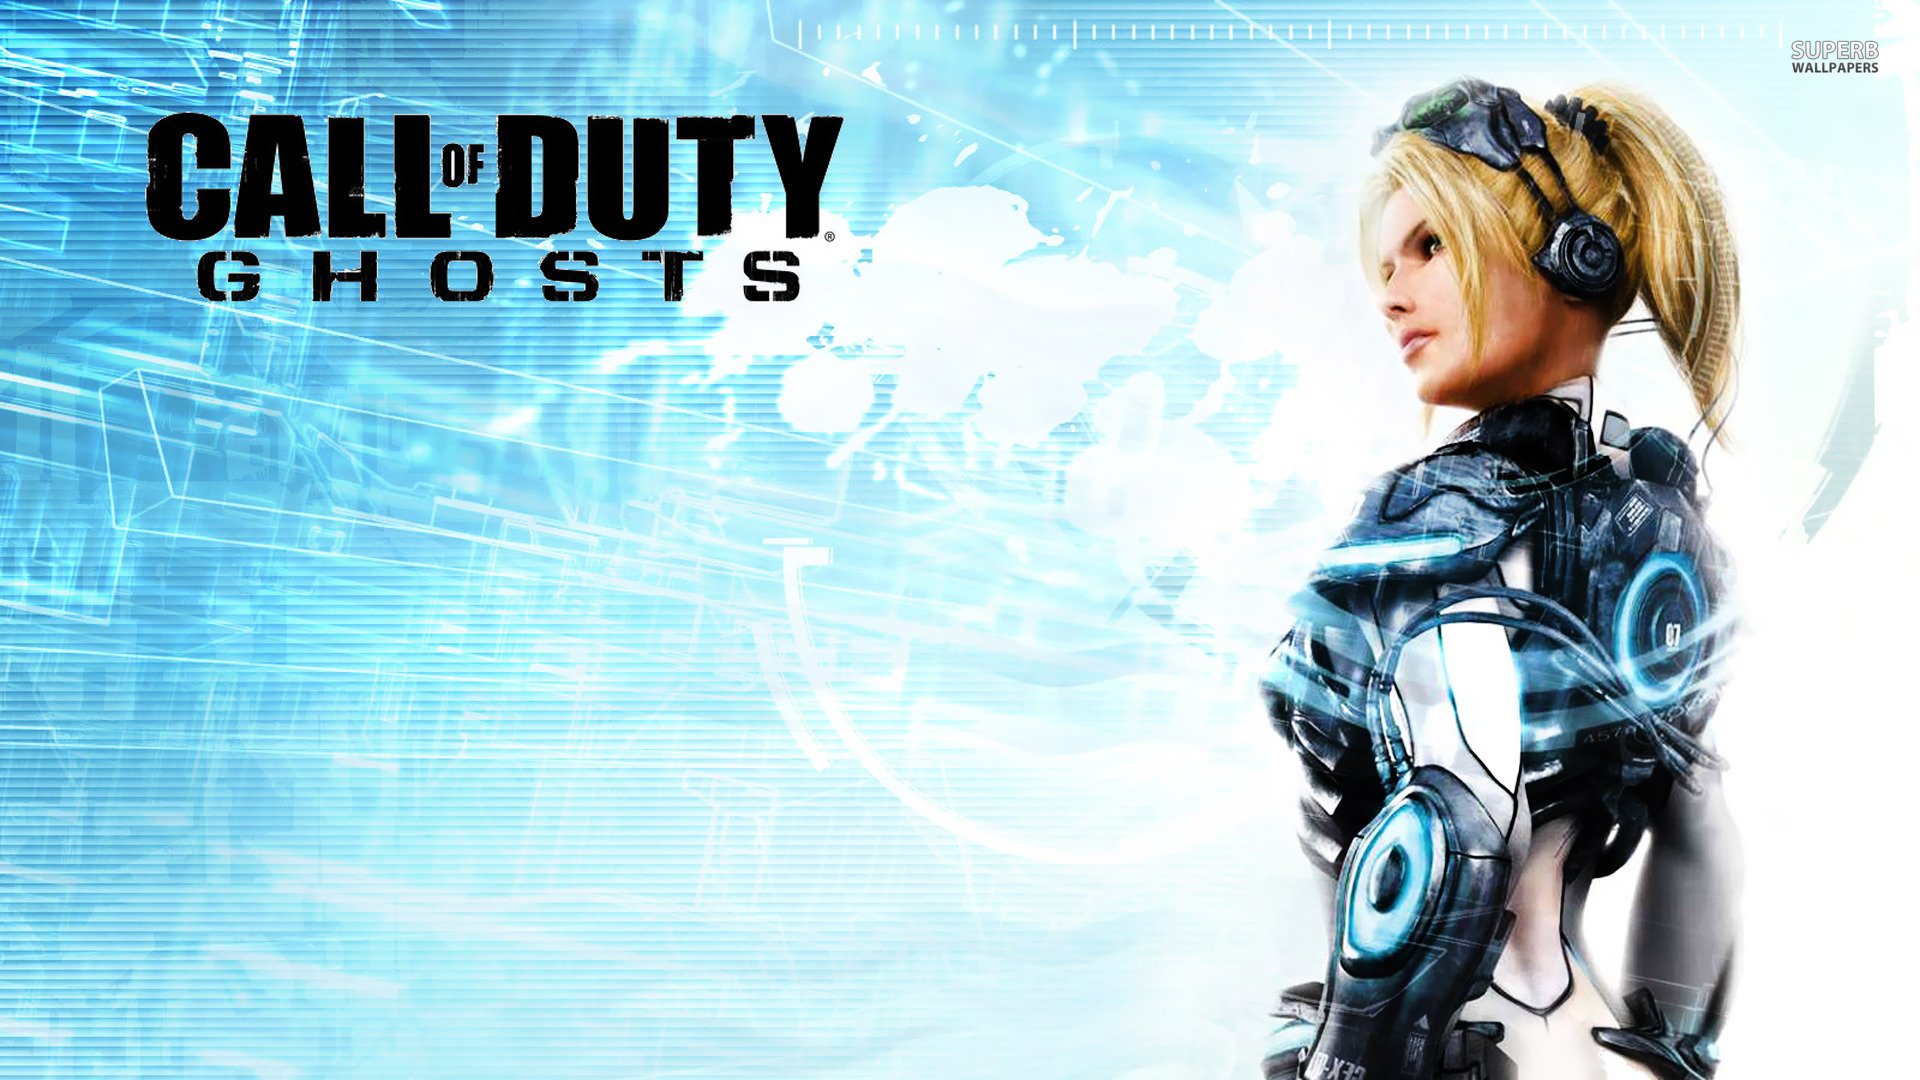 Call Of Duty Ghost Wallpaper Xcall Of Duty Ghosts Wallpapers Hdkcaadw 1920x1080